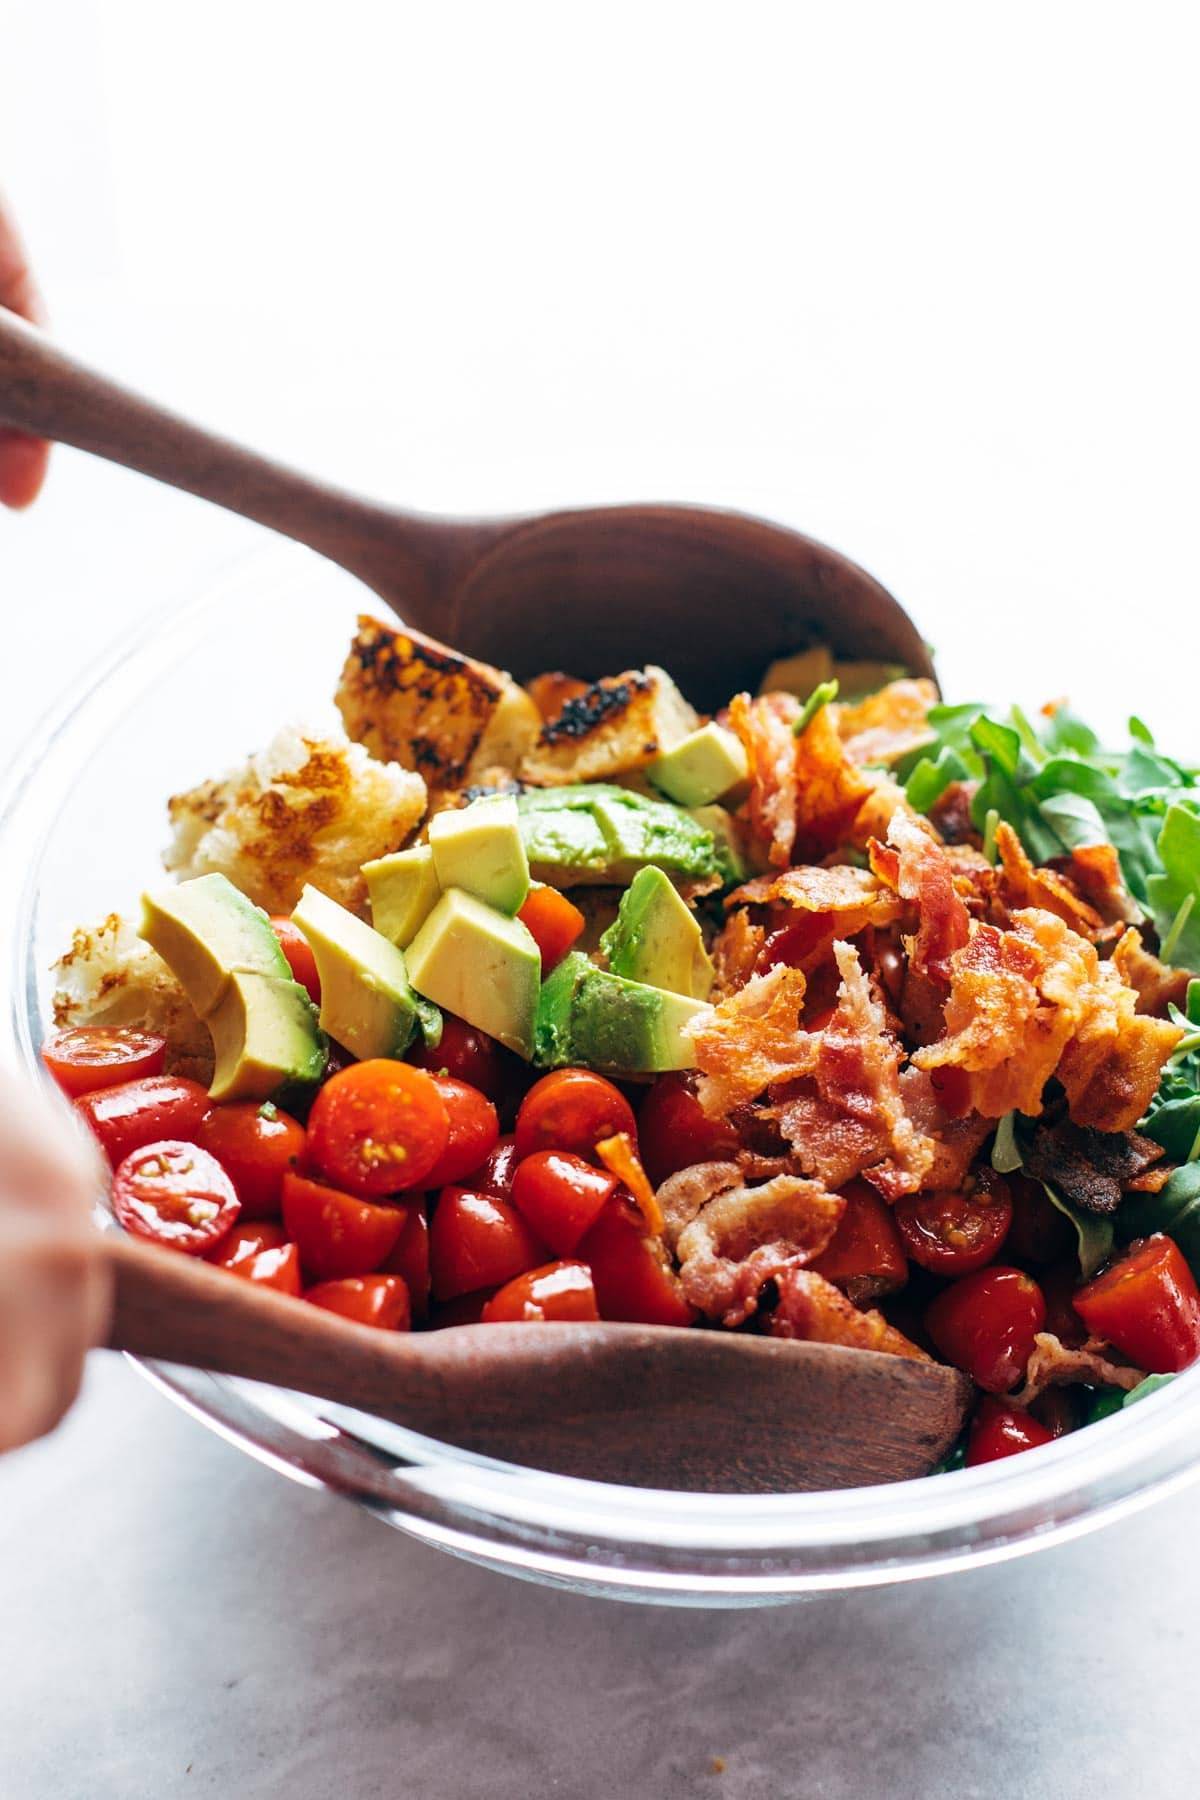 BLT Panzanella ingredients tossed in a bowl.